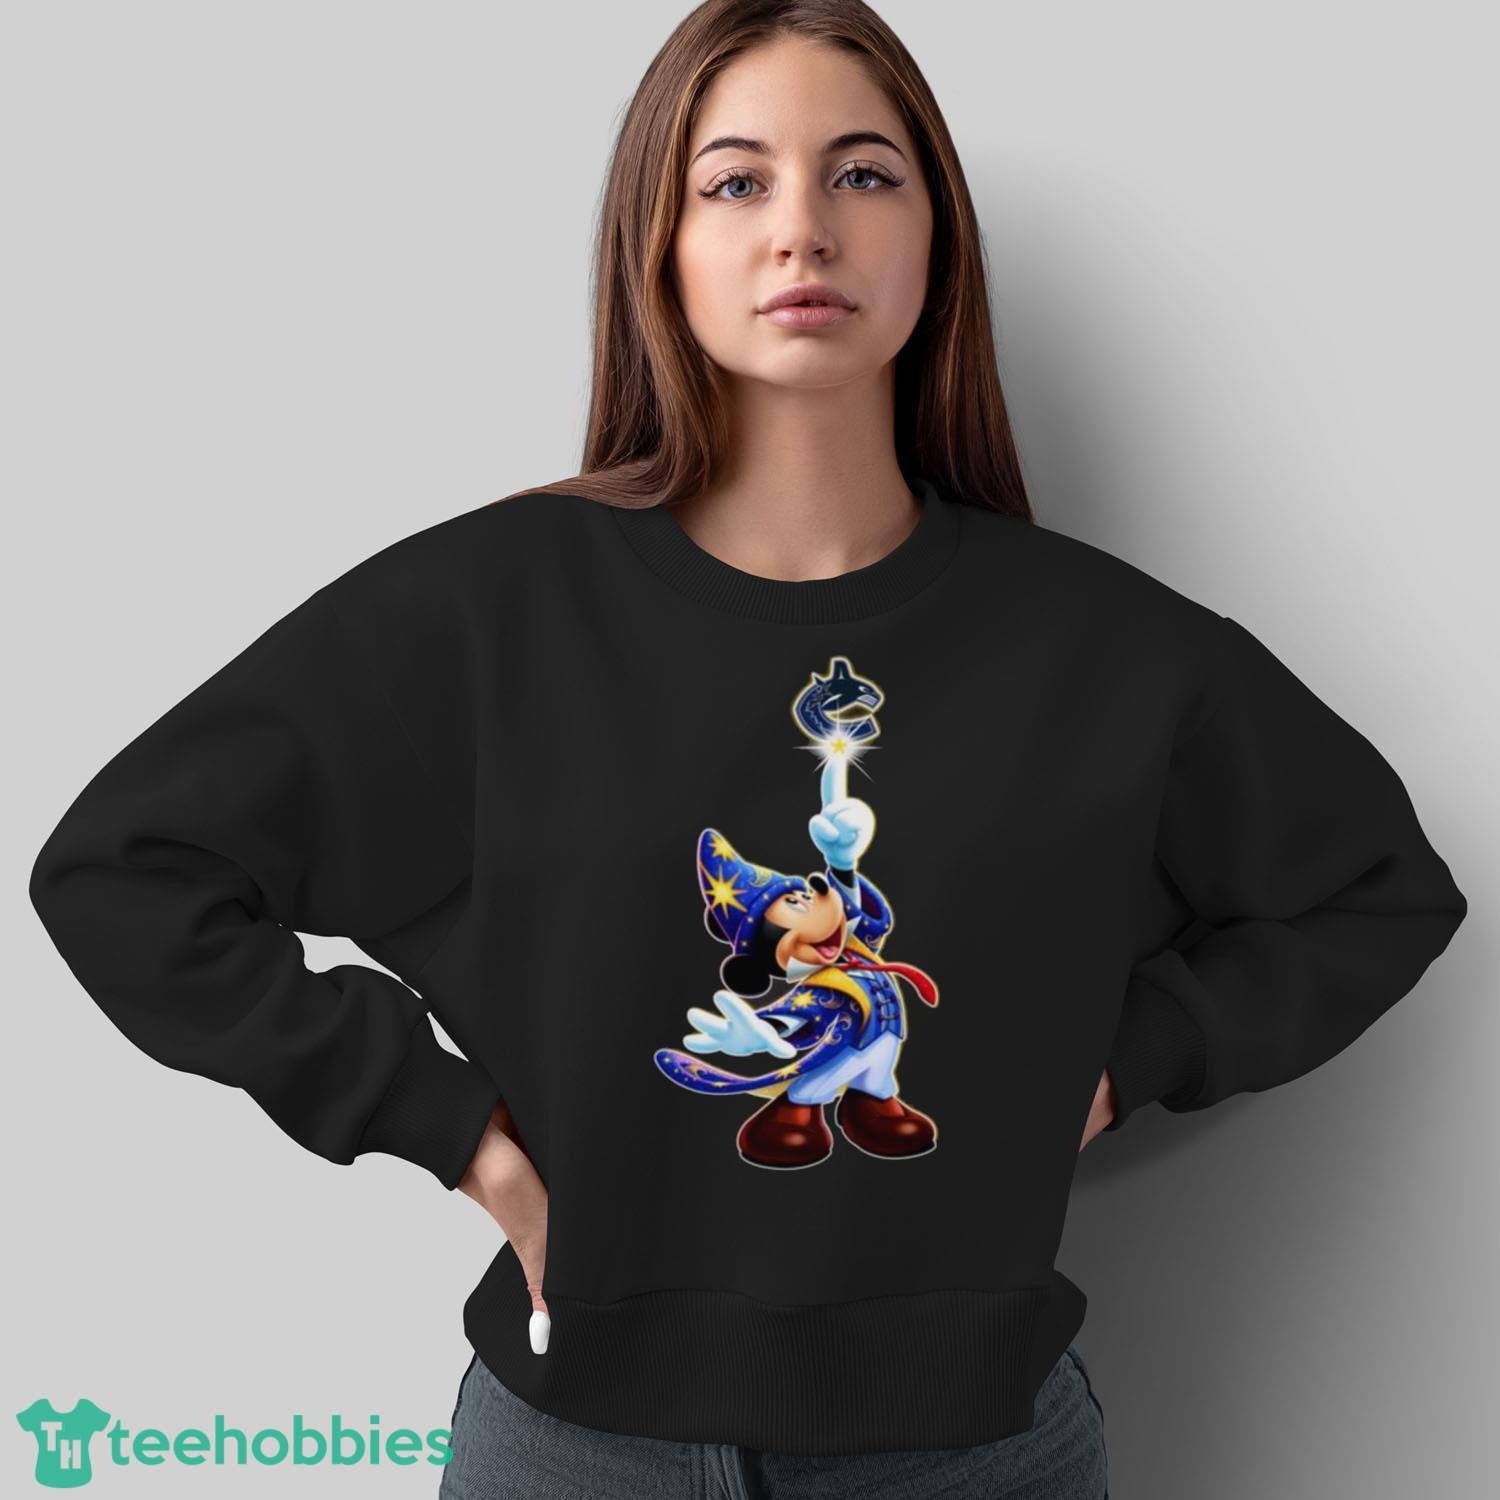 NHL Vancouver Canucks Mickey Mouse Disney Hockey T Shirt Youth T